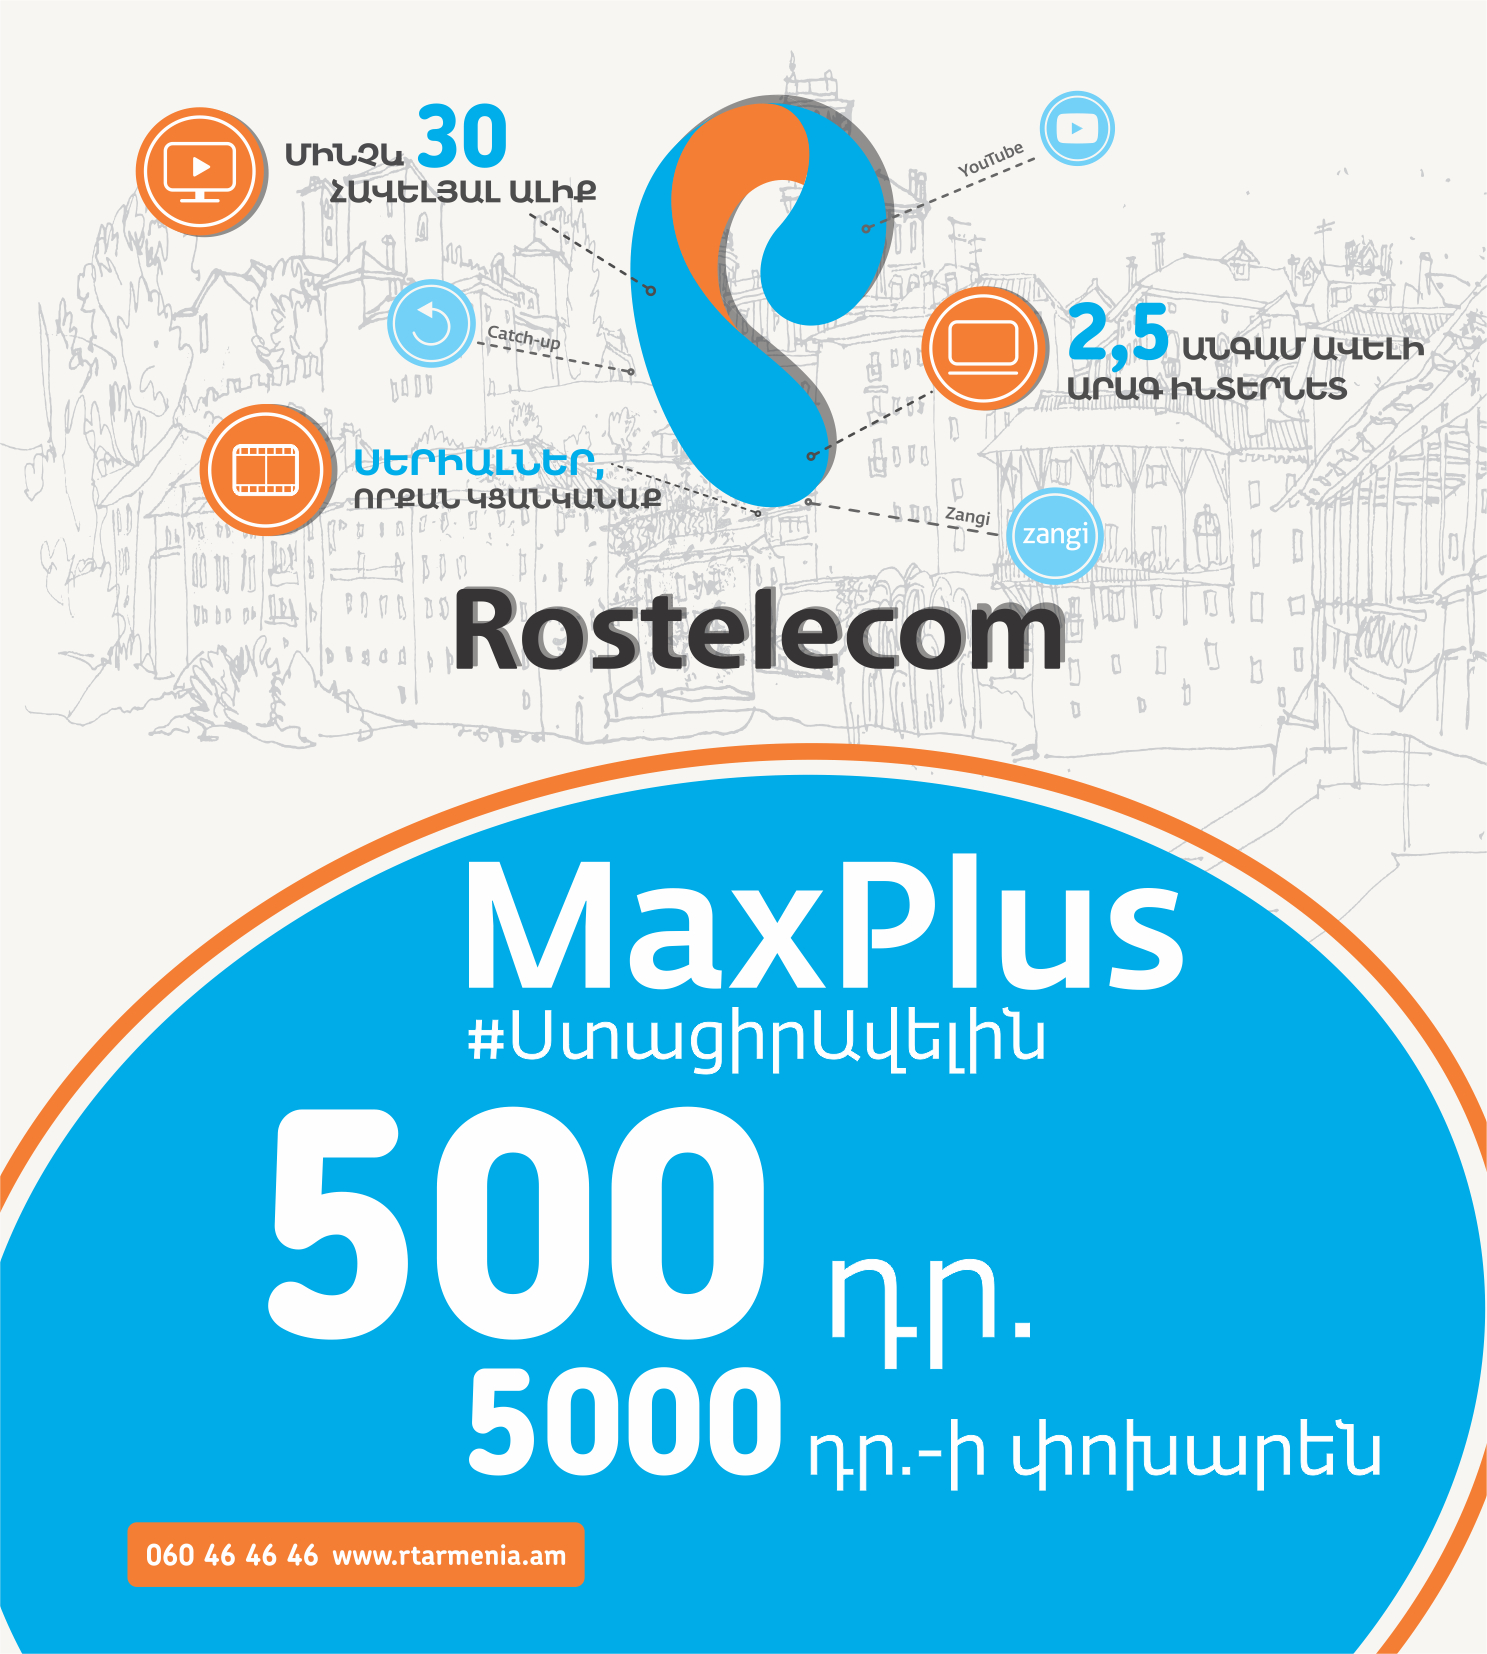 Rostelecom offers new MaxPlus package for Trio tariff subscribers.